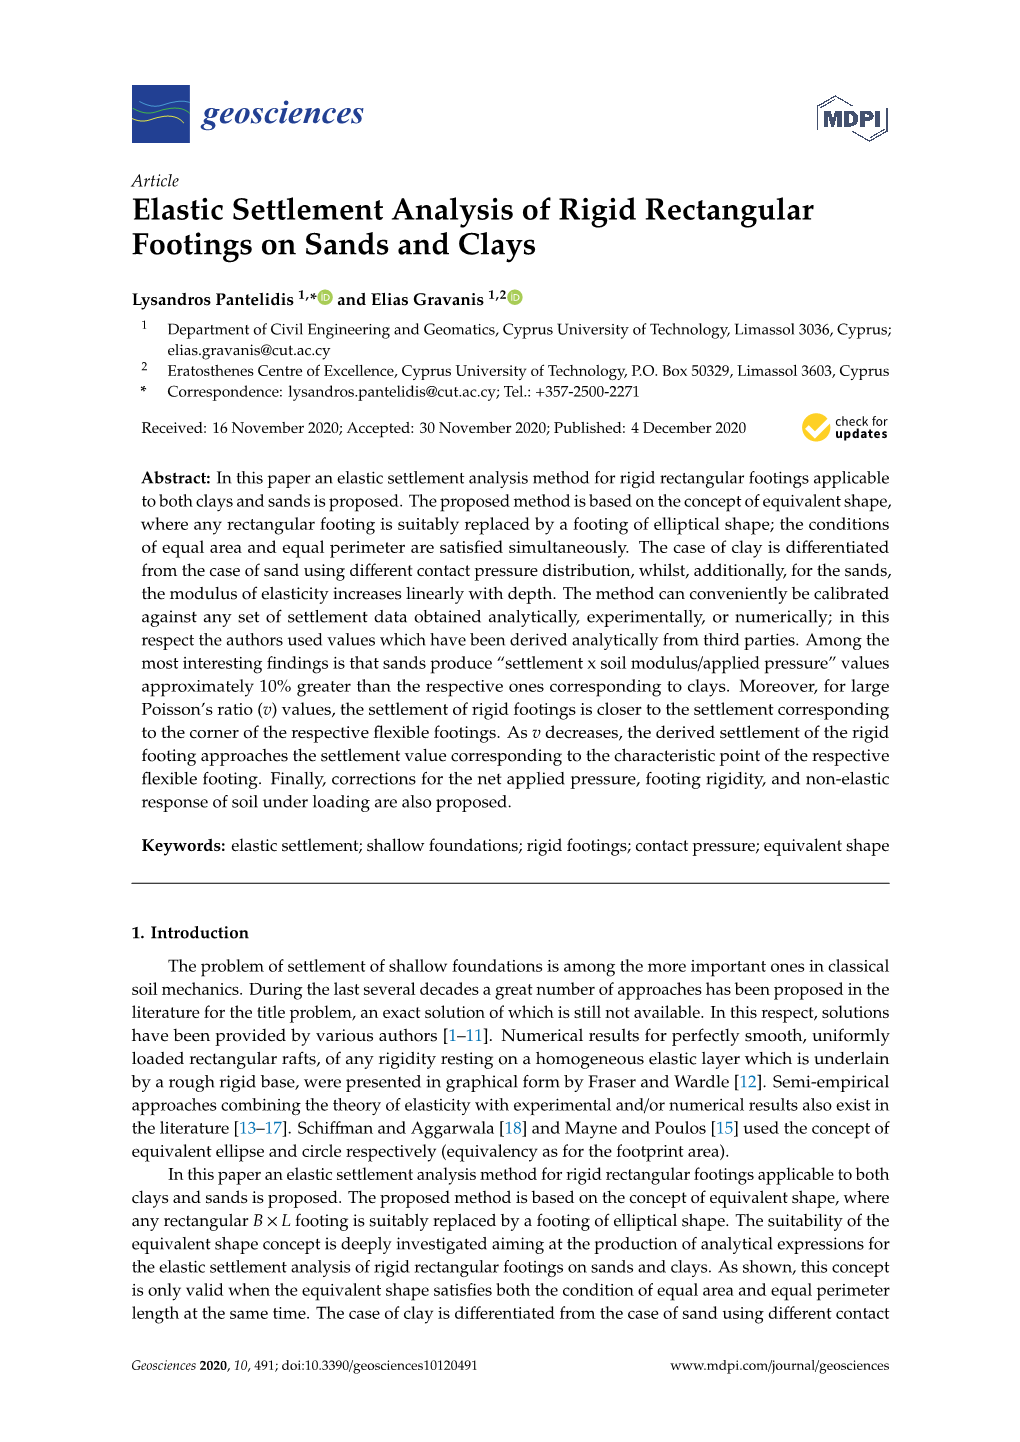 Elastic Settlement Analysis of Rigid Rectangular Footings on Sands and Clays